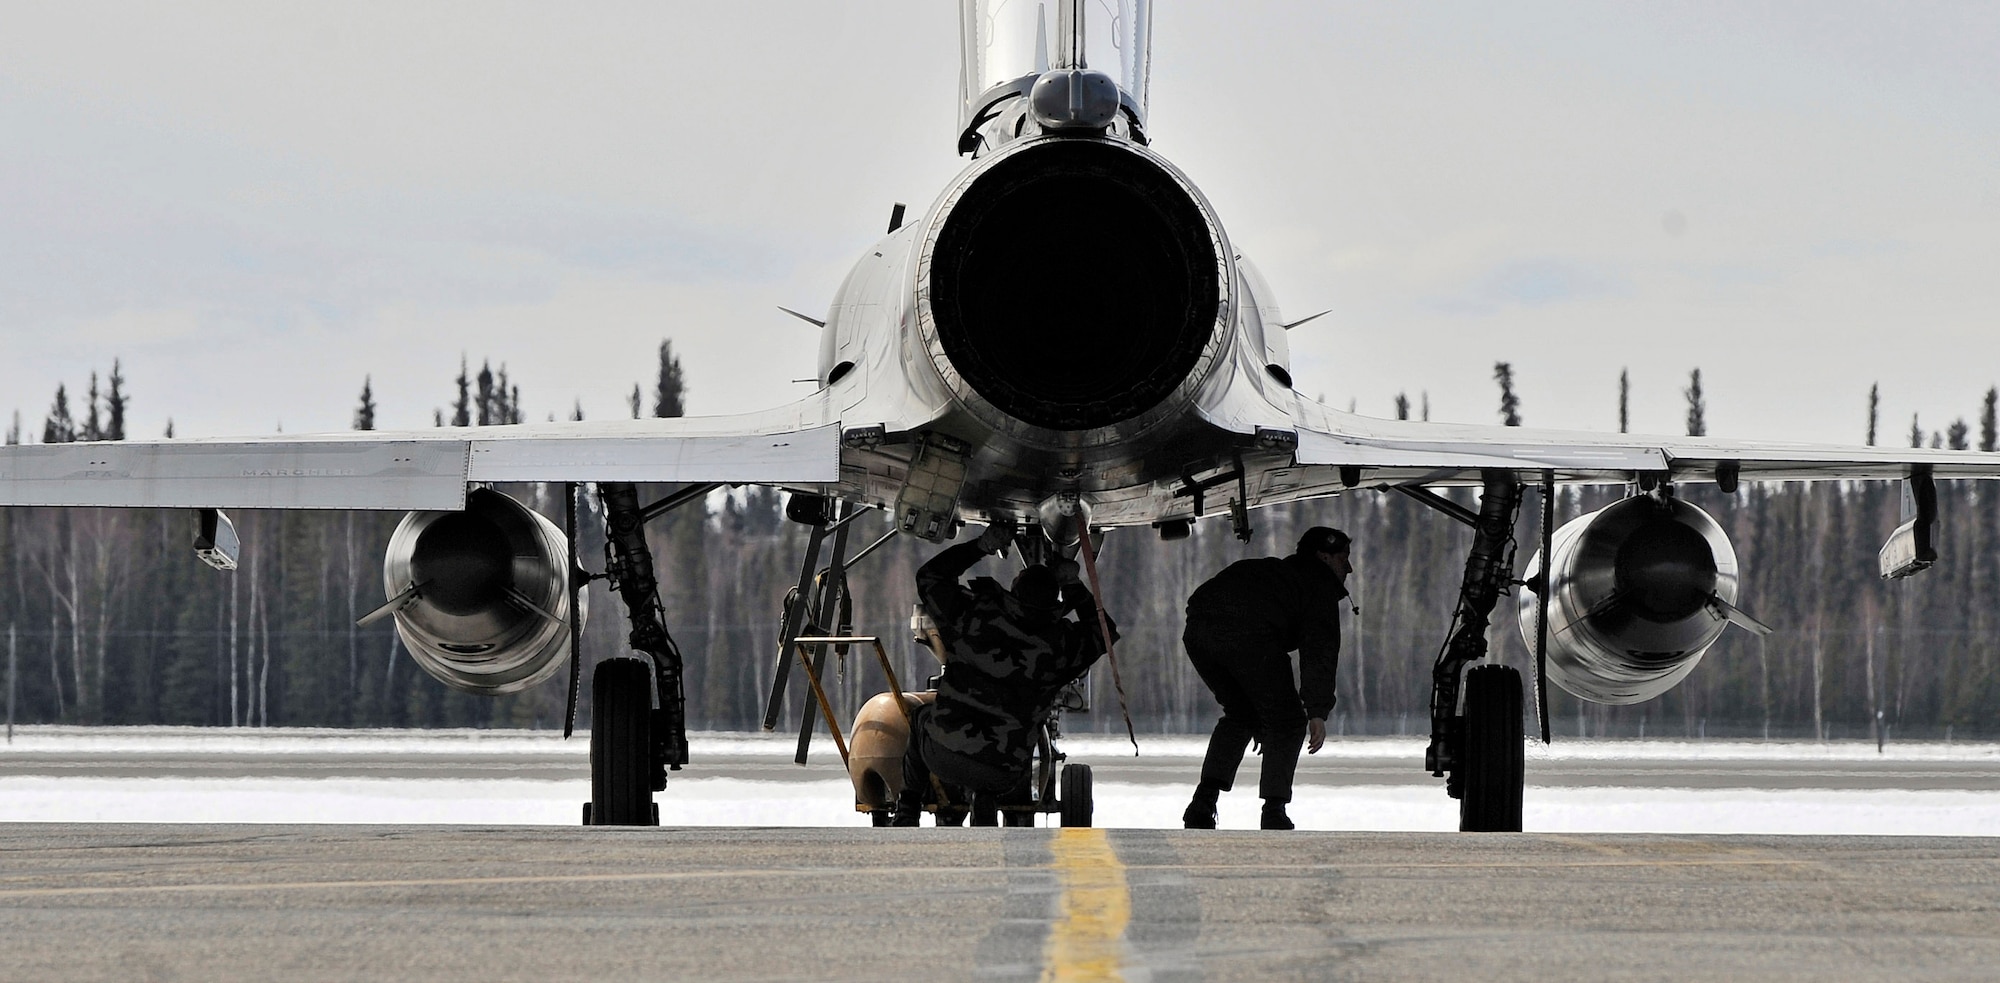 Aircraft maintainers from Luxeuil Air Base, France, conduct post flight checks April 14 on a Mirage 2000 fighter at Eielson Air Force Base, Alaska. French air force personnel arrived at Eielson AFB to participate in Red Flag-Alaska 09-2.  This exercise provides joint offensive counter-air, interdiction, close air support and large-force employment training in a simulated combat environment. (U.S. Air Force photo/Airman 1st Class Willard E. Grande II)